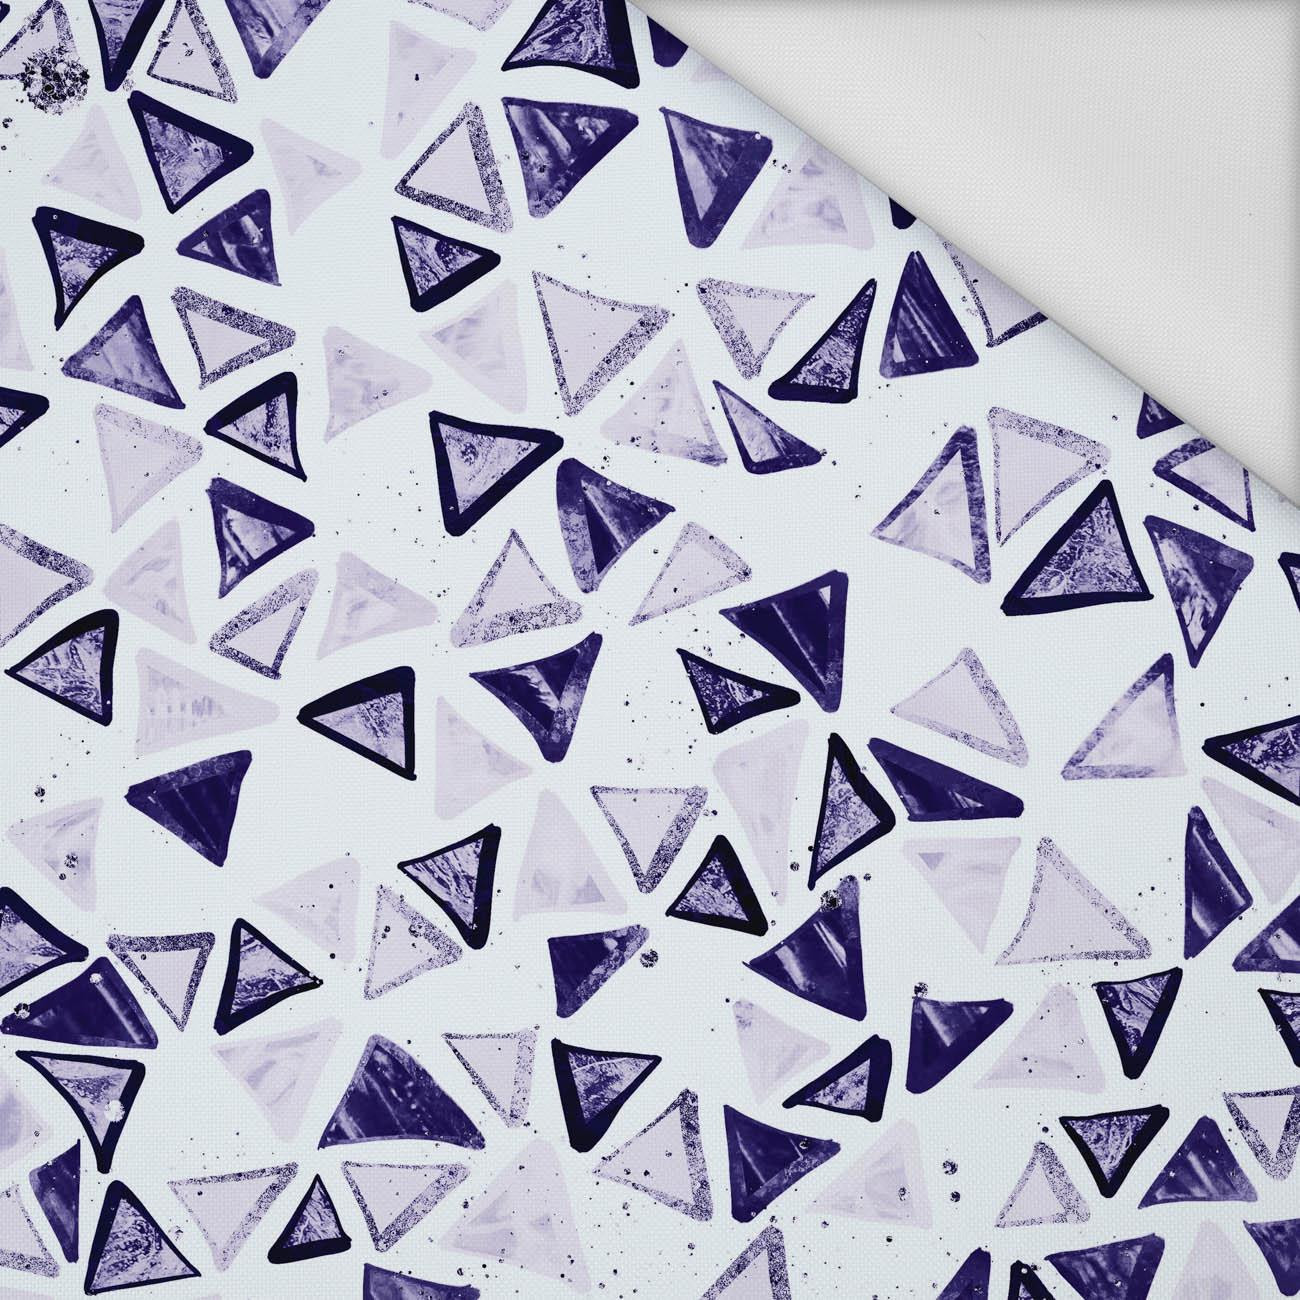 TROPICAL TRIANGLES no. 2 (Very Peri) - Waterproof woven fabric